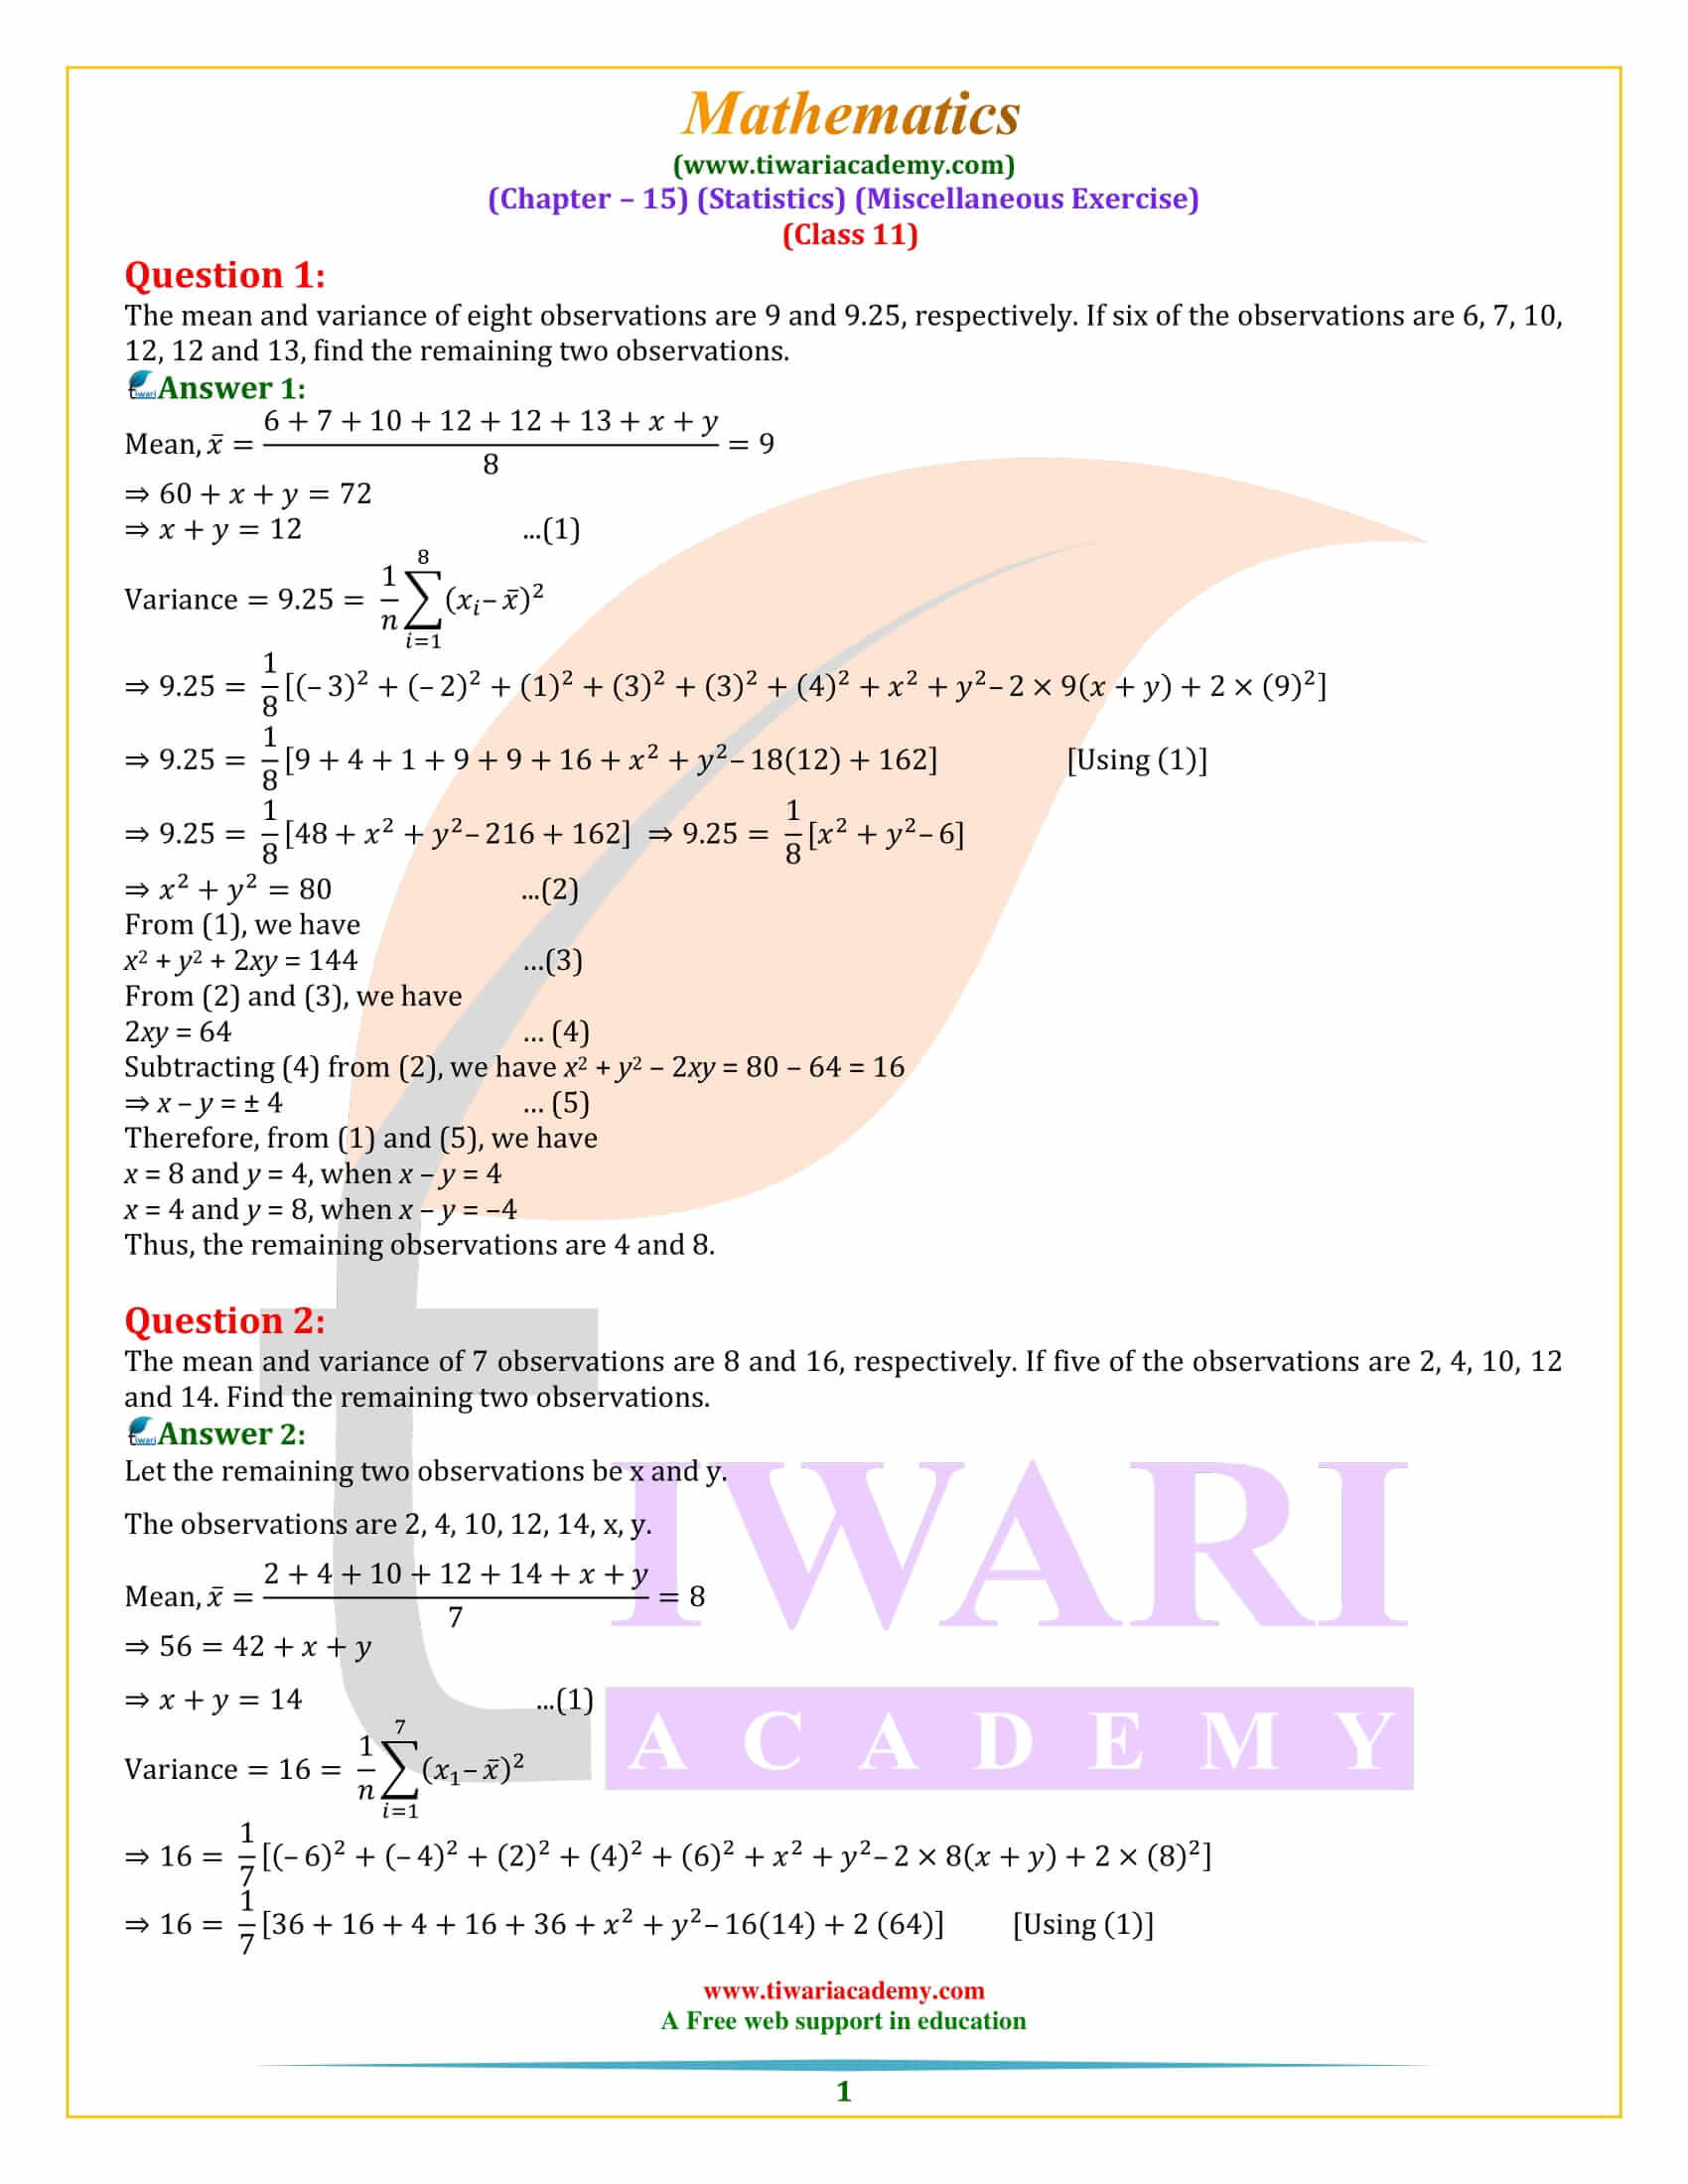 Class 11 Maths Chapter 15 Miscellaneous Exercise Statistics